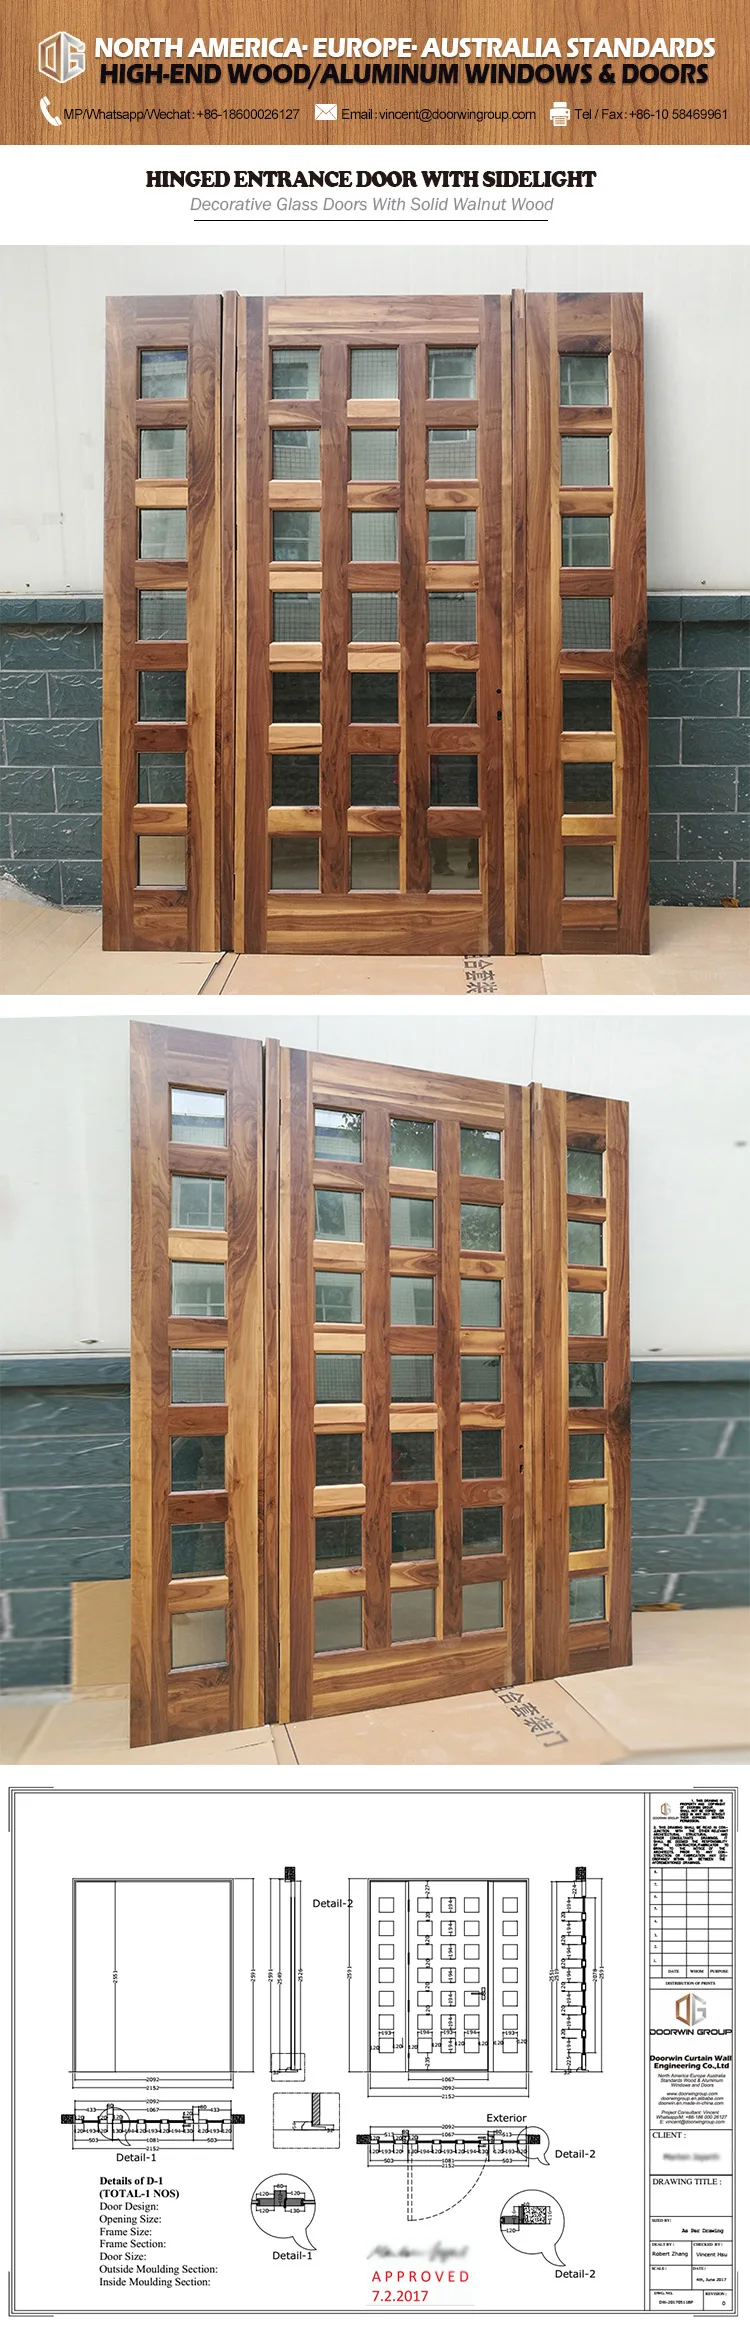 china solid wood doors factory best price entrance solid wood door with grille made of black walnut